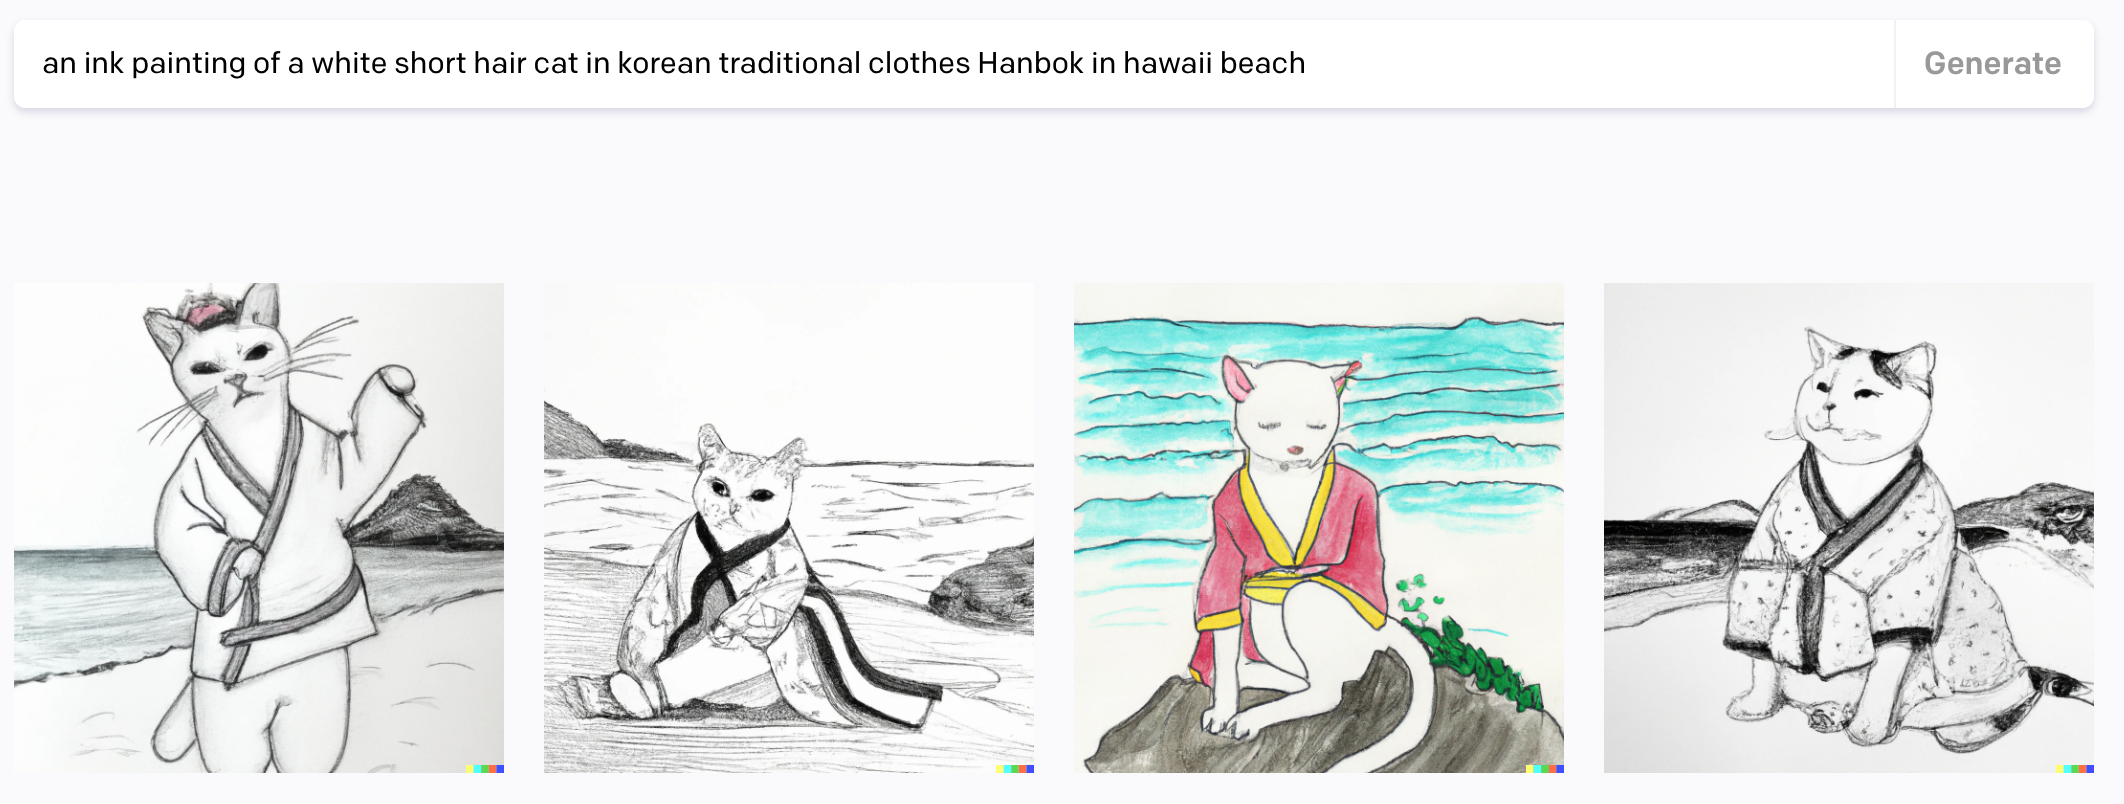 an-ink-painting-of-a-white-short-hair-cat-in-korean-traditional-clothes-Hanbok-in-hawaii-beach